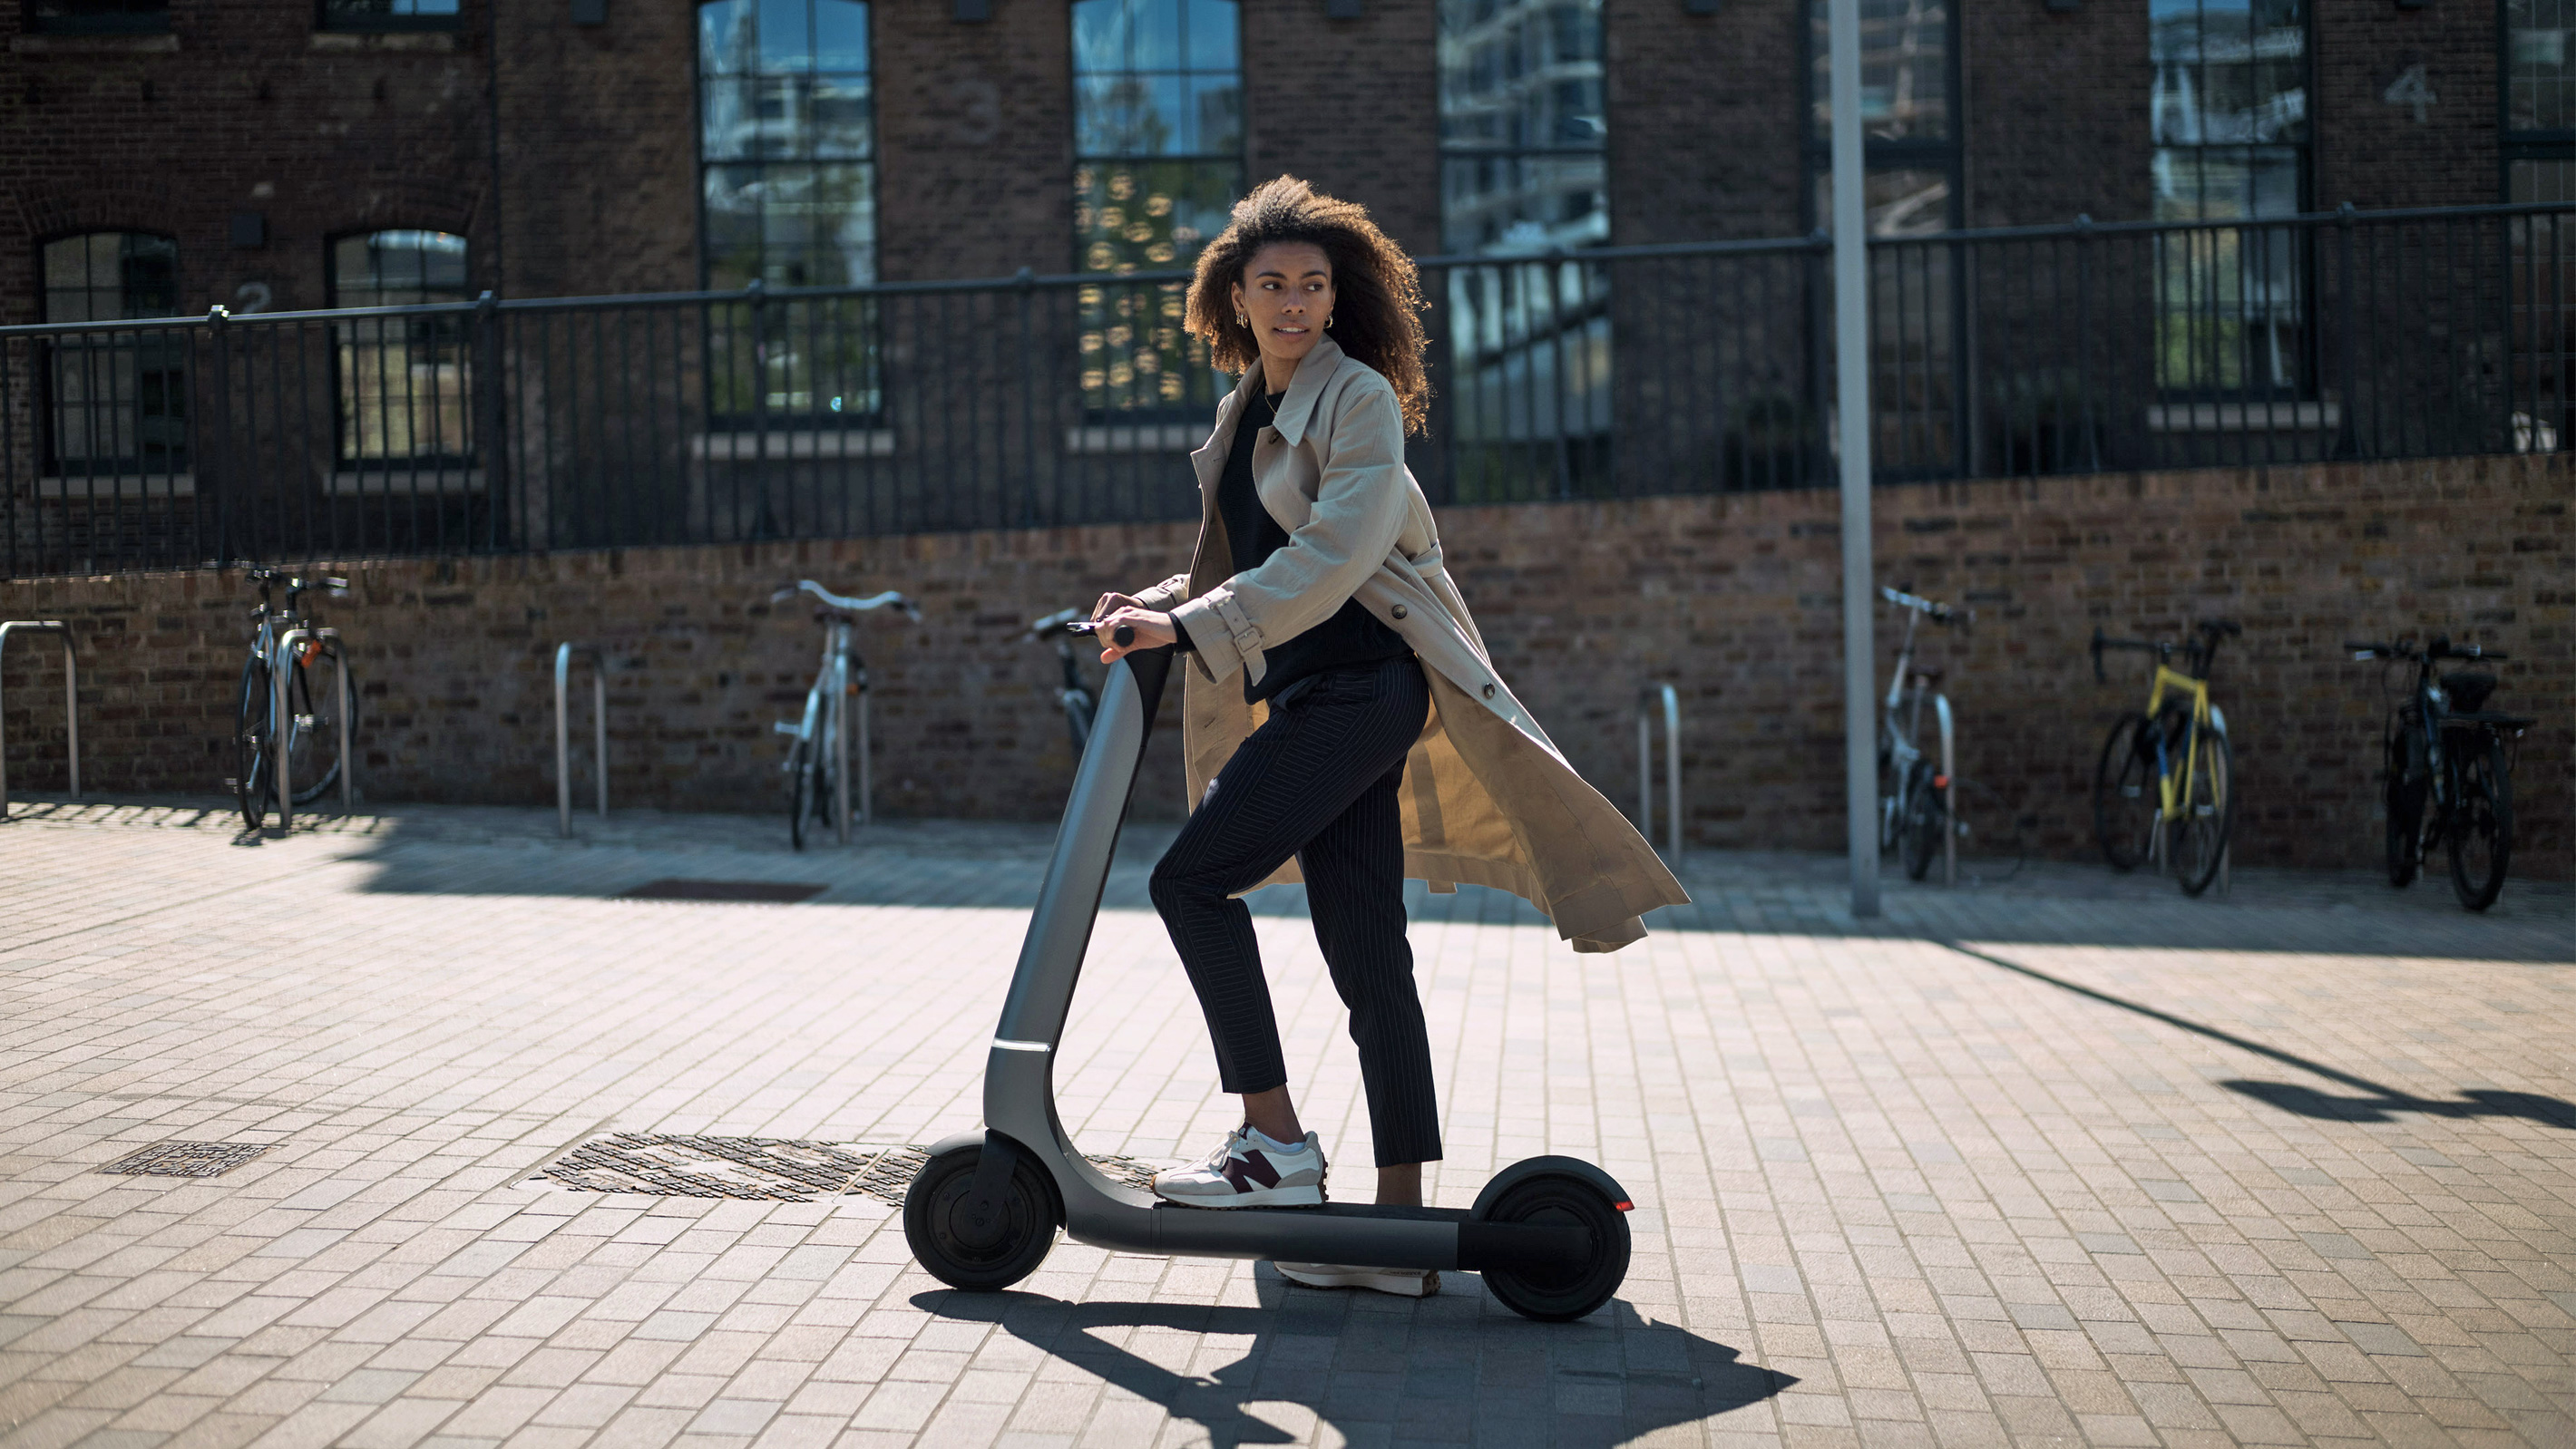 This Teslainspired electric scooter looks amazing, but there's one